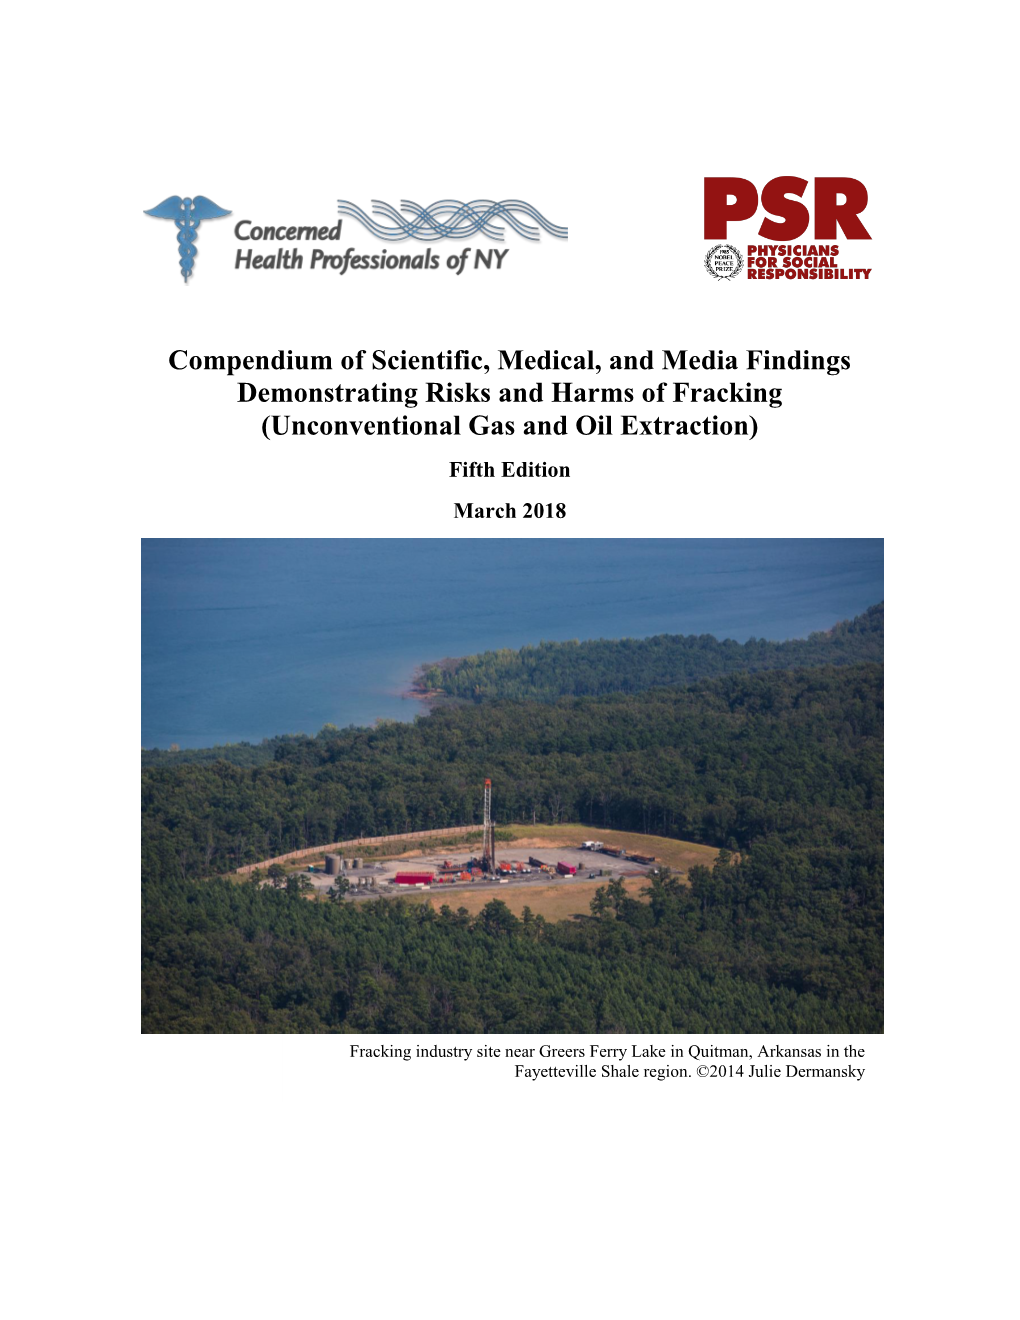 Compendium of Scientific, Medical, and Media Findings Demonstrating Risks and Harms of Fracking (Unconventional Gas and Oil Extraction) Fifth Edition March 2018